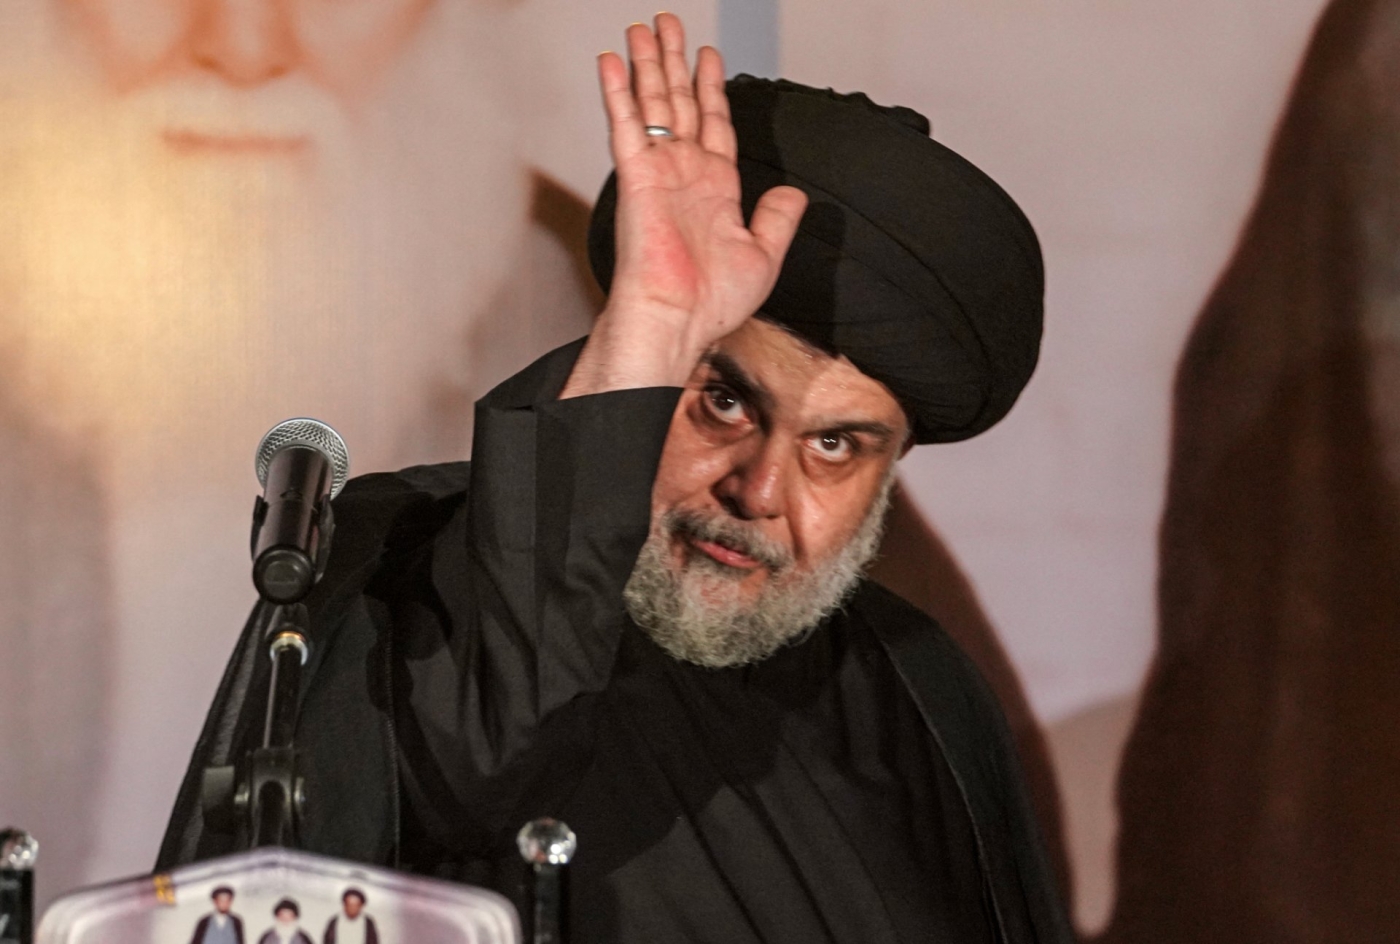 Muqtada al-Sadr, speaking in Najaf, on 3 June. One onlooker described the cleric as being "at the height of his glory" prior to his withdrawal from politics (AFP)